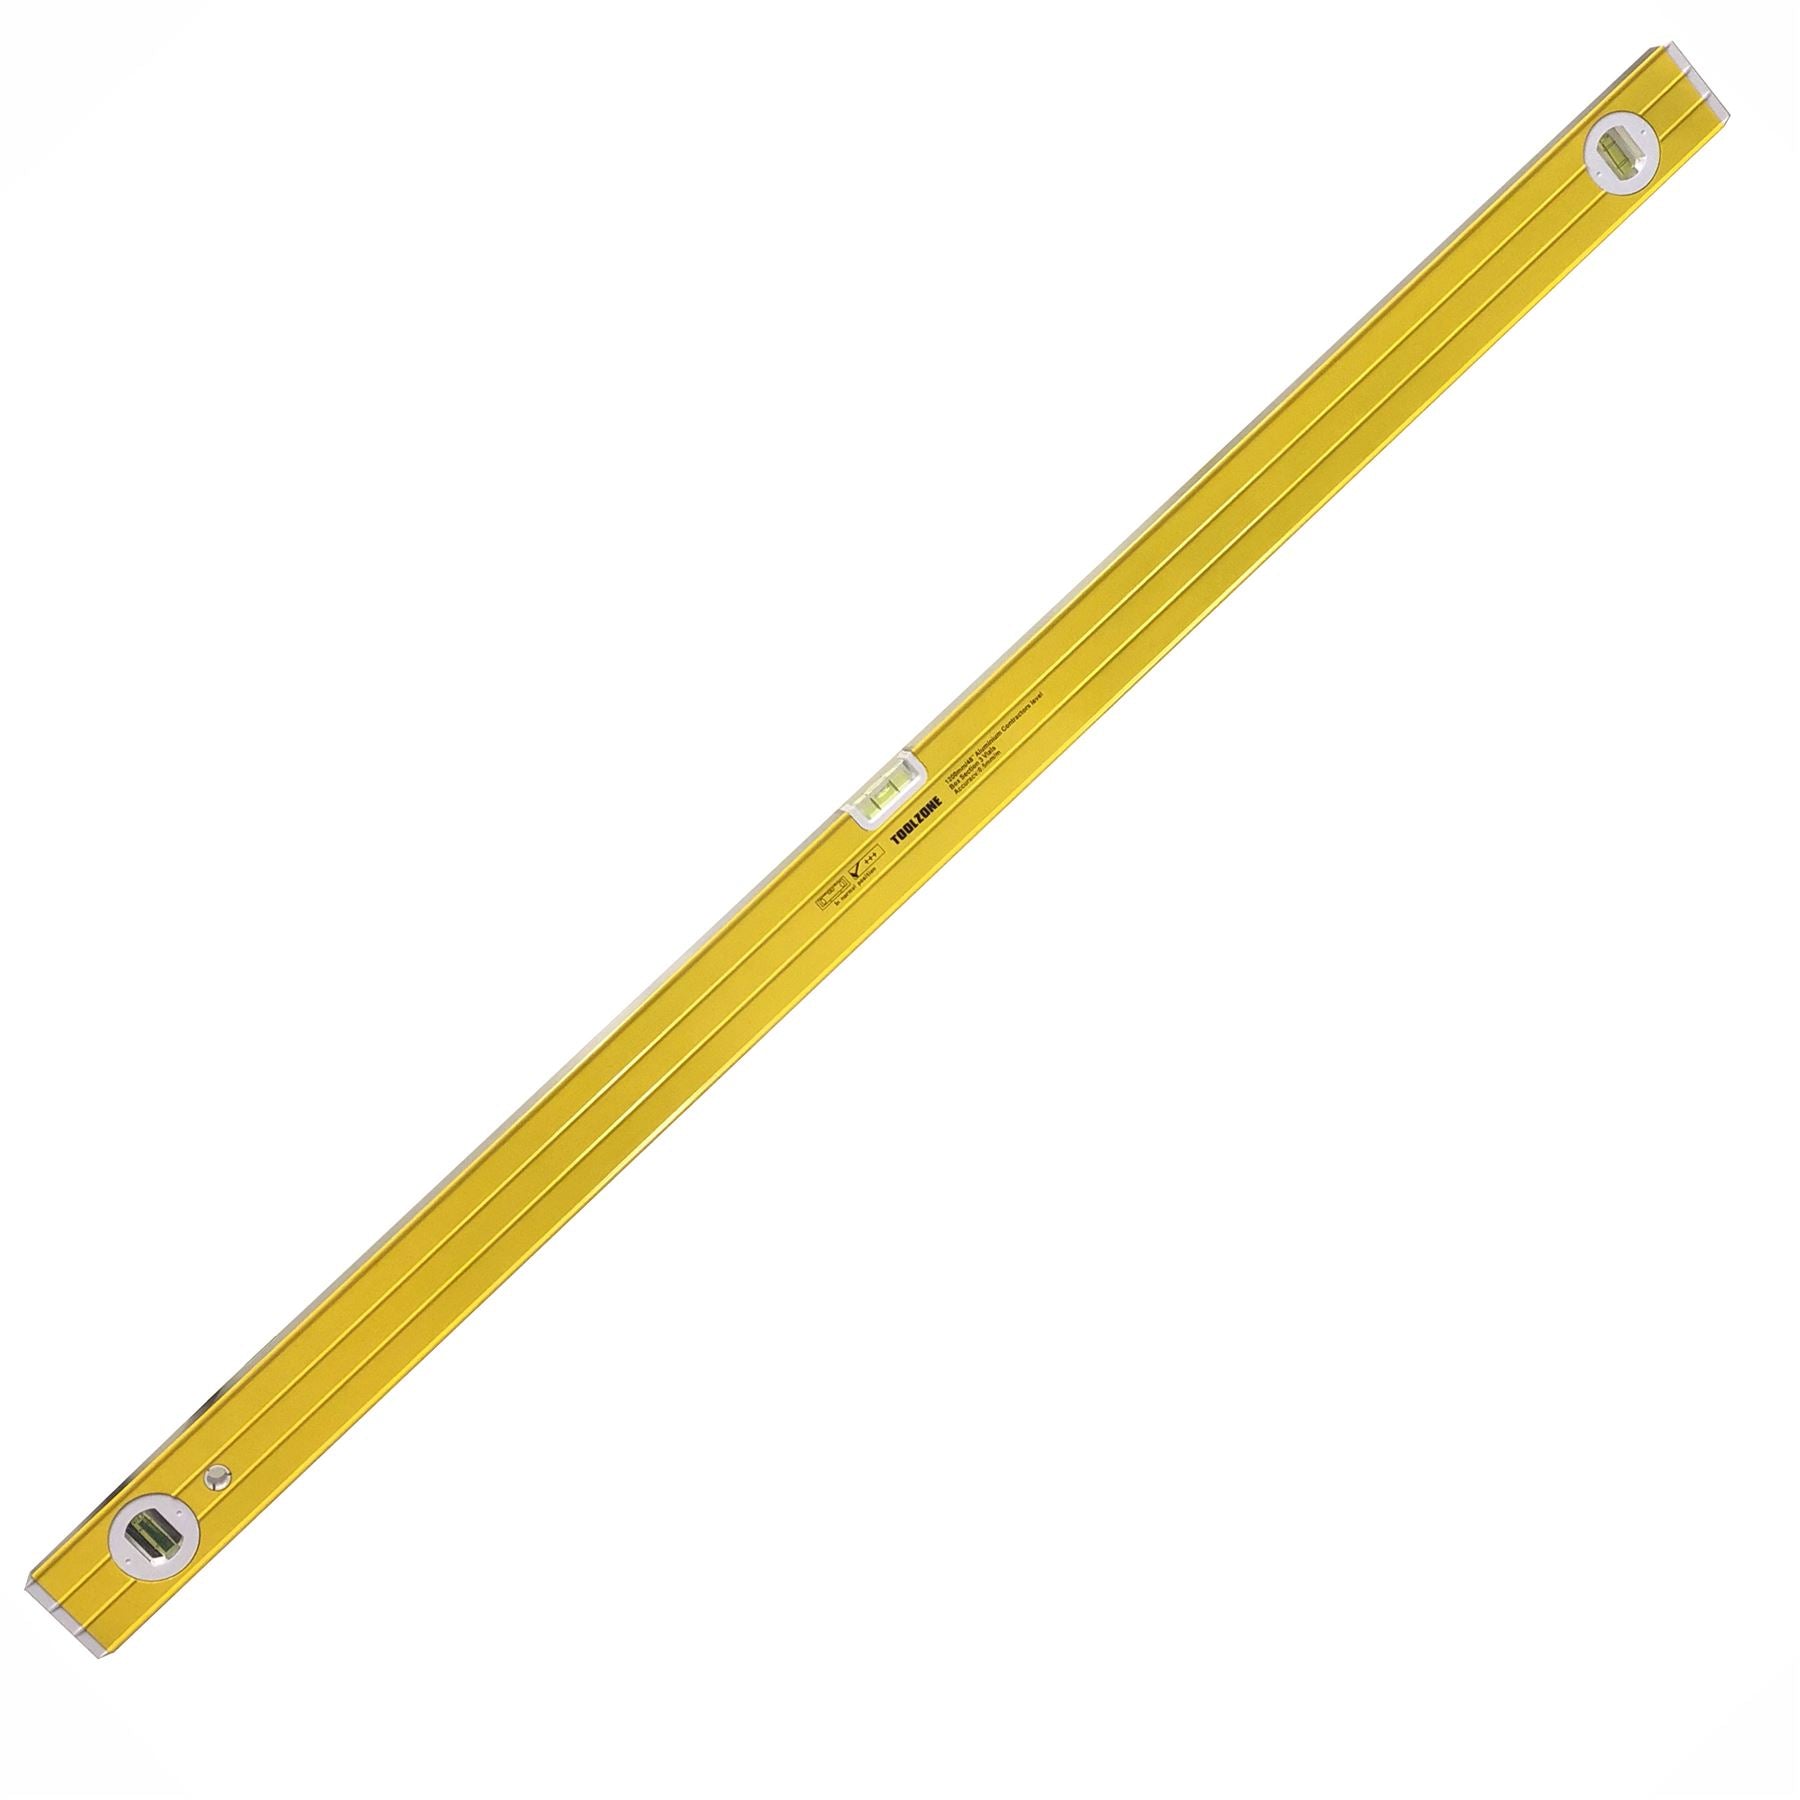 48" 1200mm Ribbed Spirit Level Aluminium Scaffolding Builders Milled Box Section